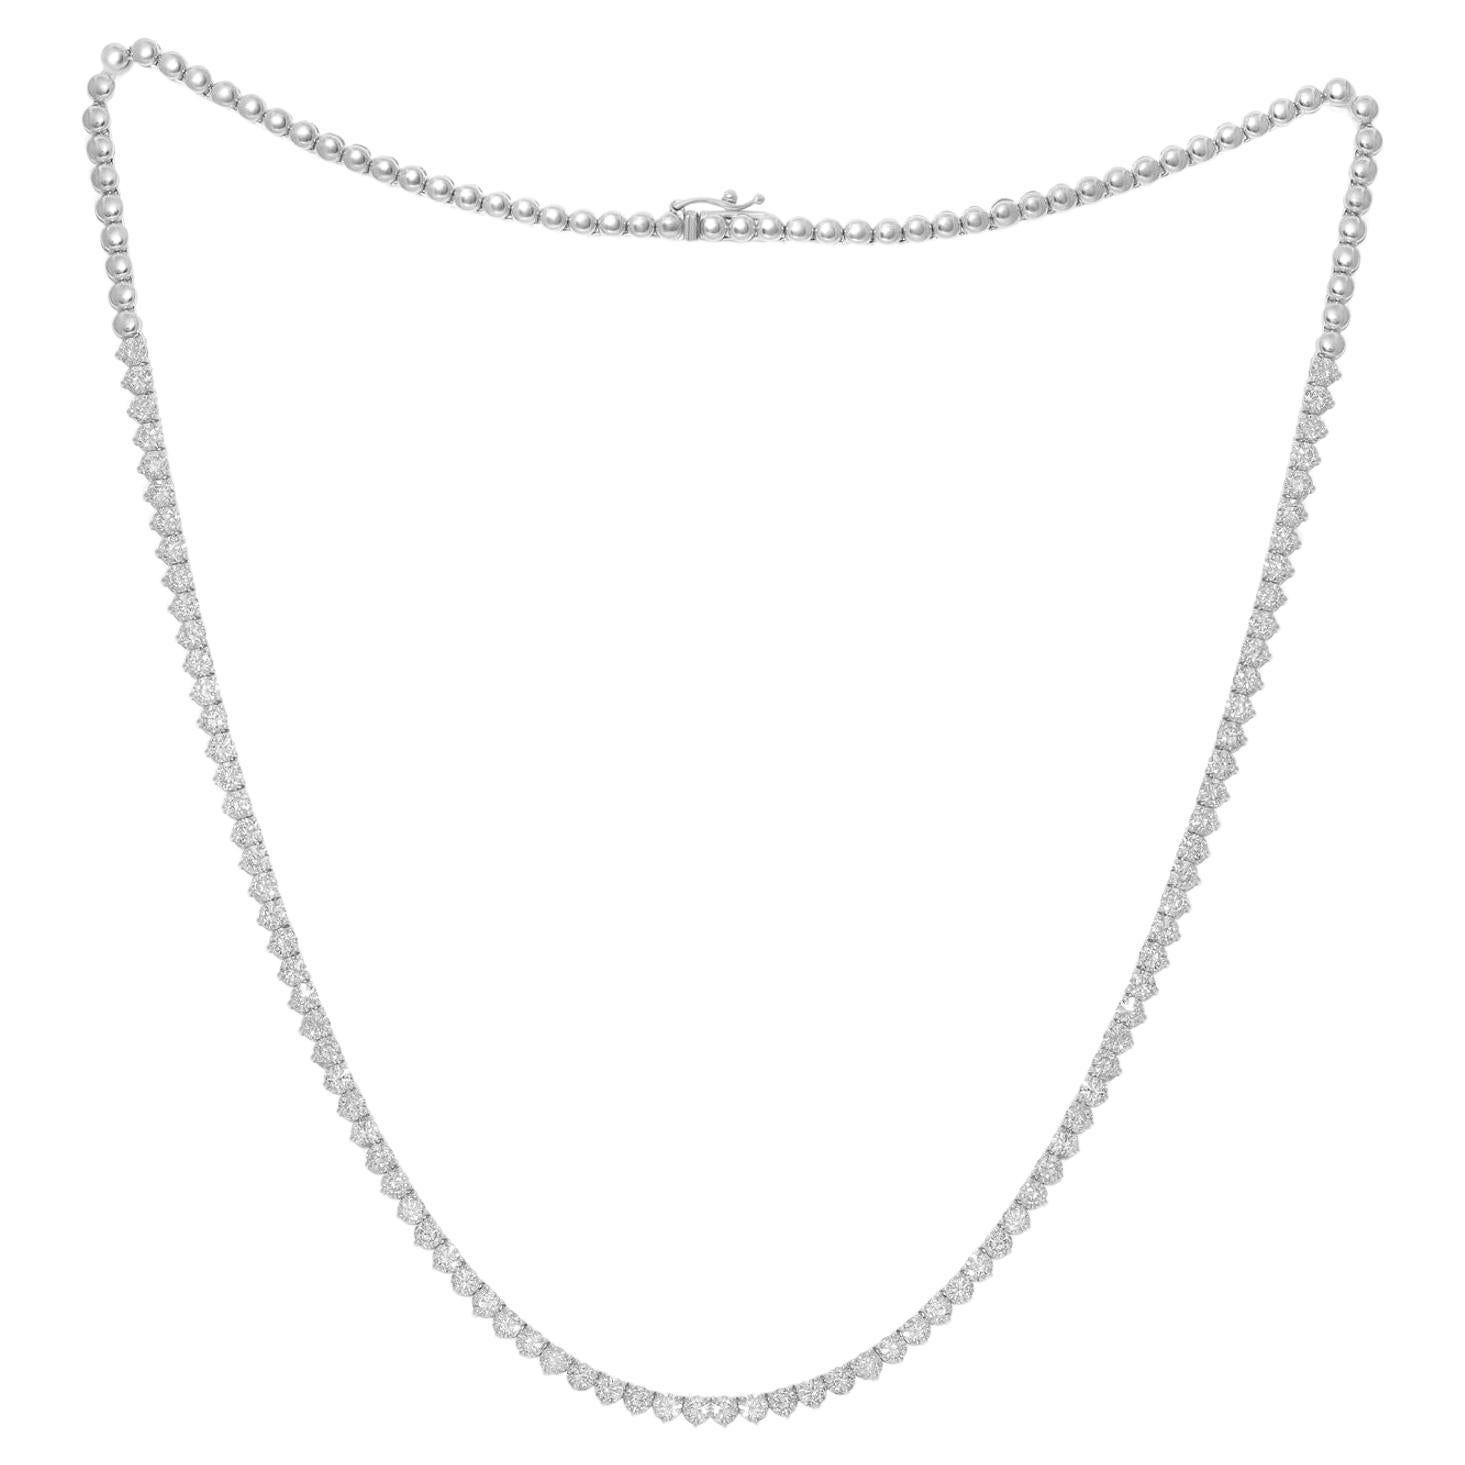 Diana M. Custom 7.50. Cts Round Diamond 17" 14K White Gold Tennis Necklace  For Sale